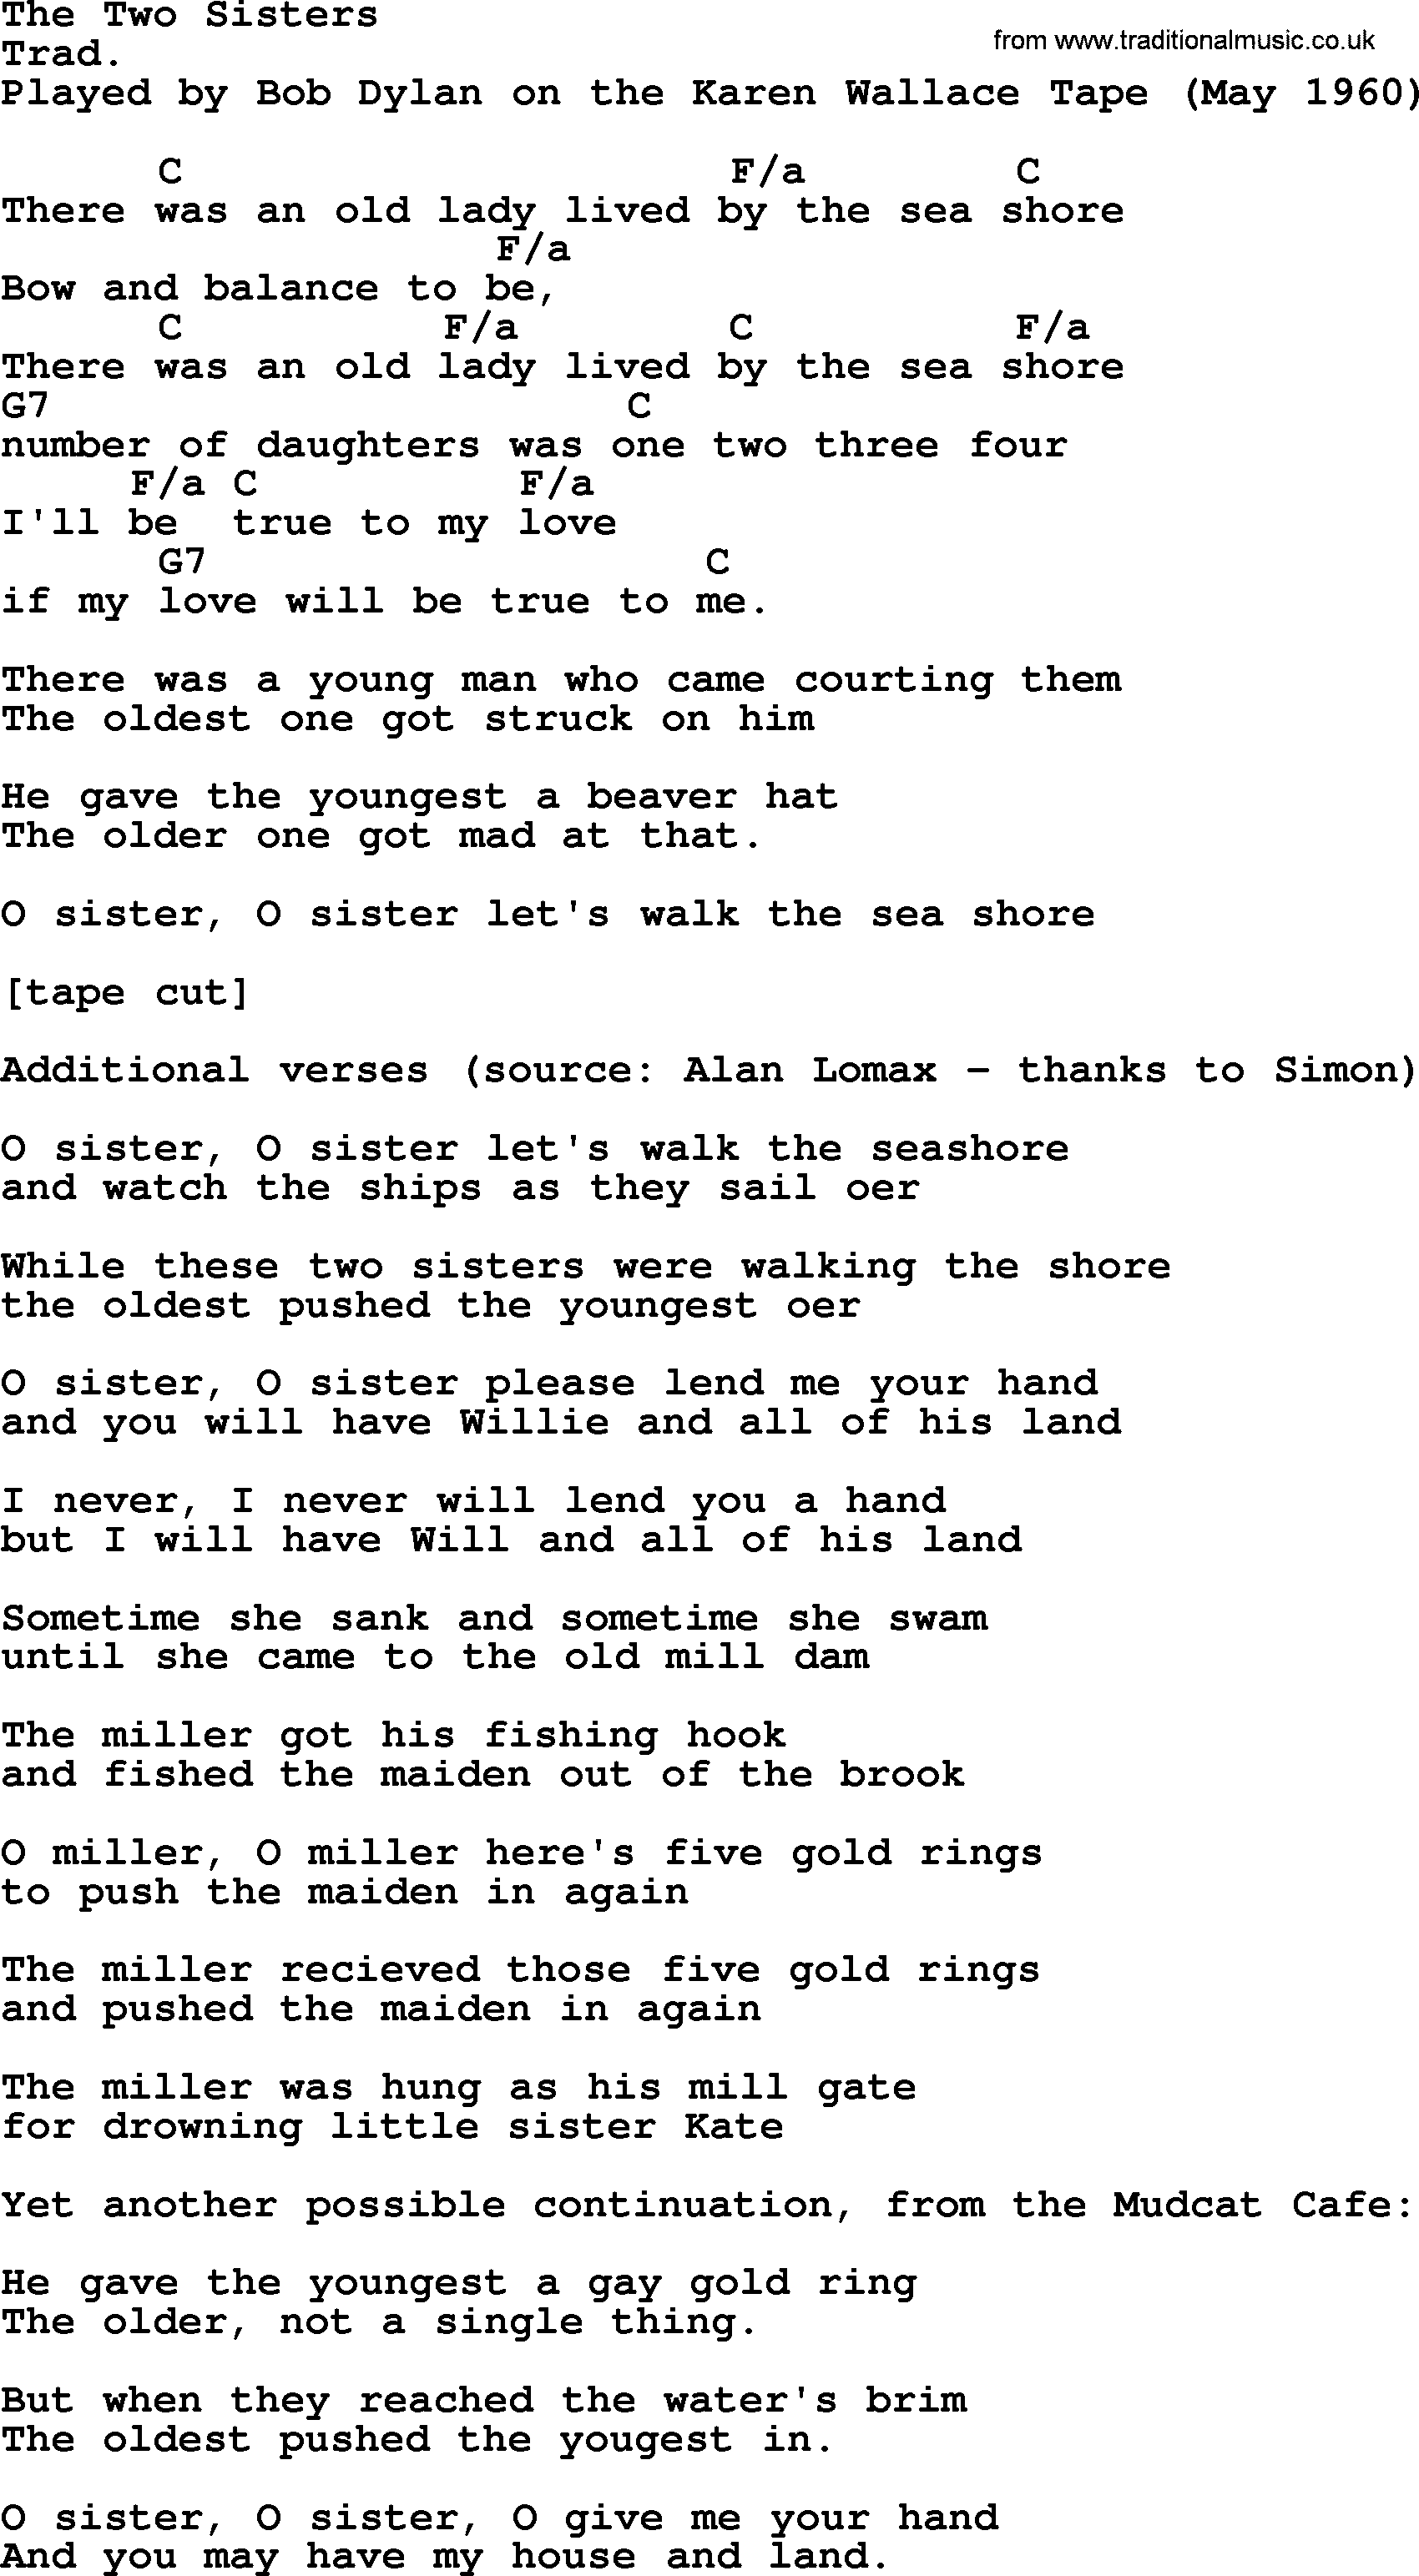 Bob Dylan song, lyrics with chords - The Two Sisters